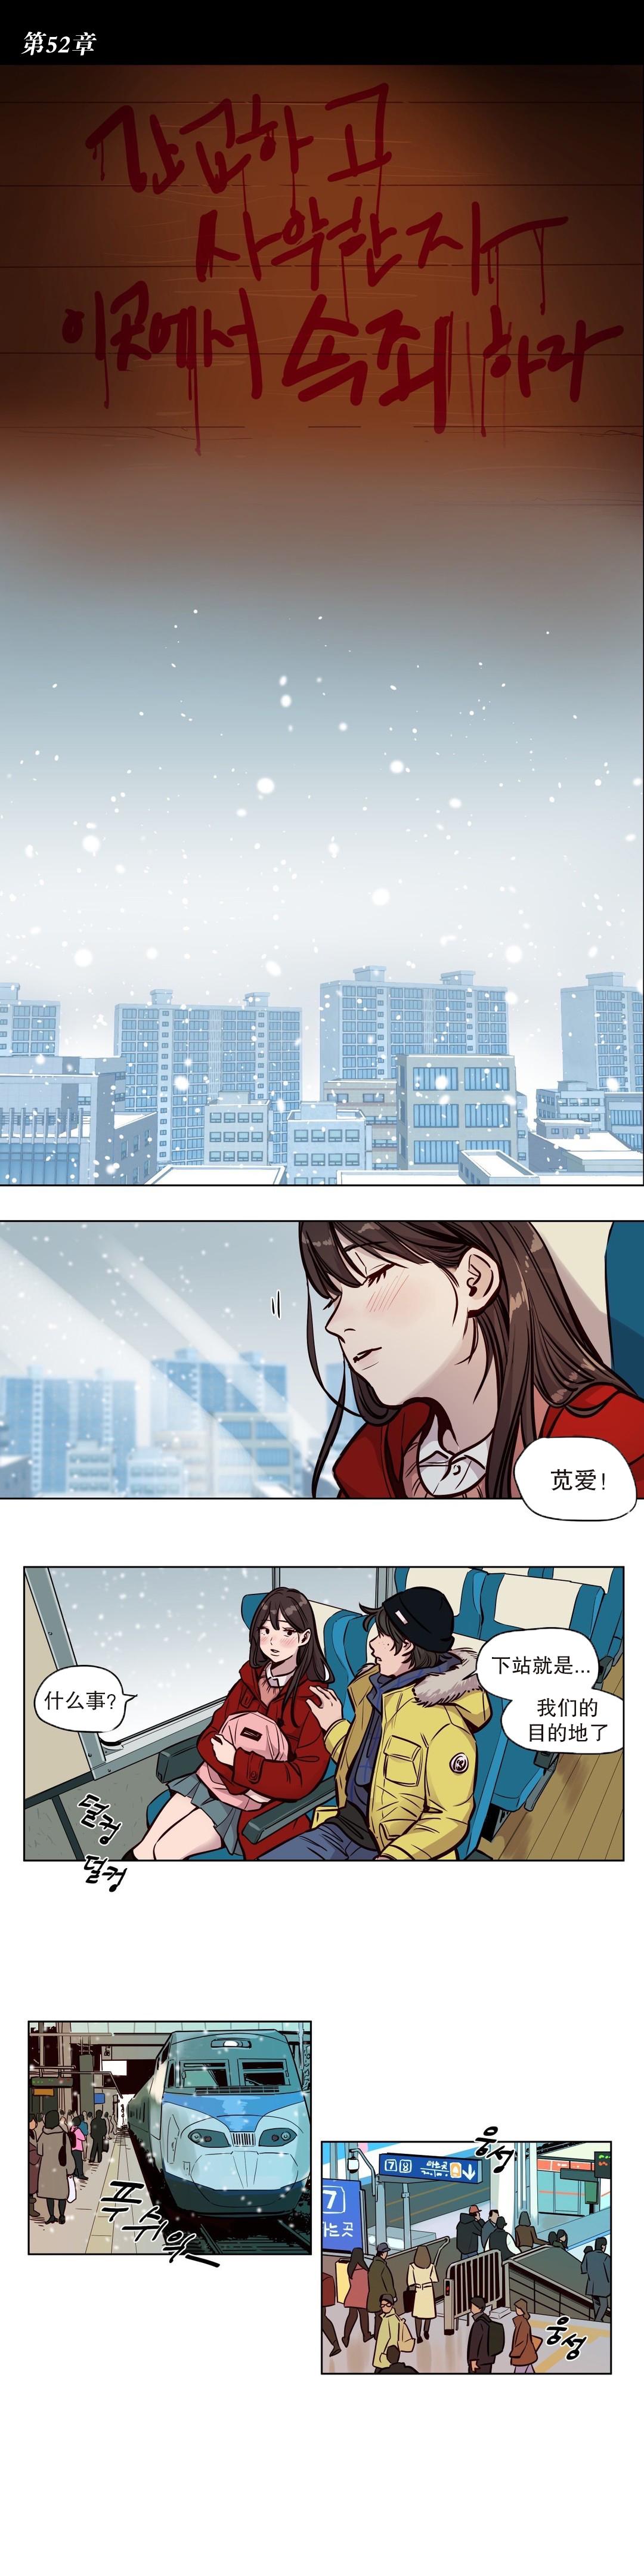 [Ramjak] 赎罪营(Atonement Camp) Ch.50-52 (Chinese) 23